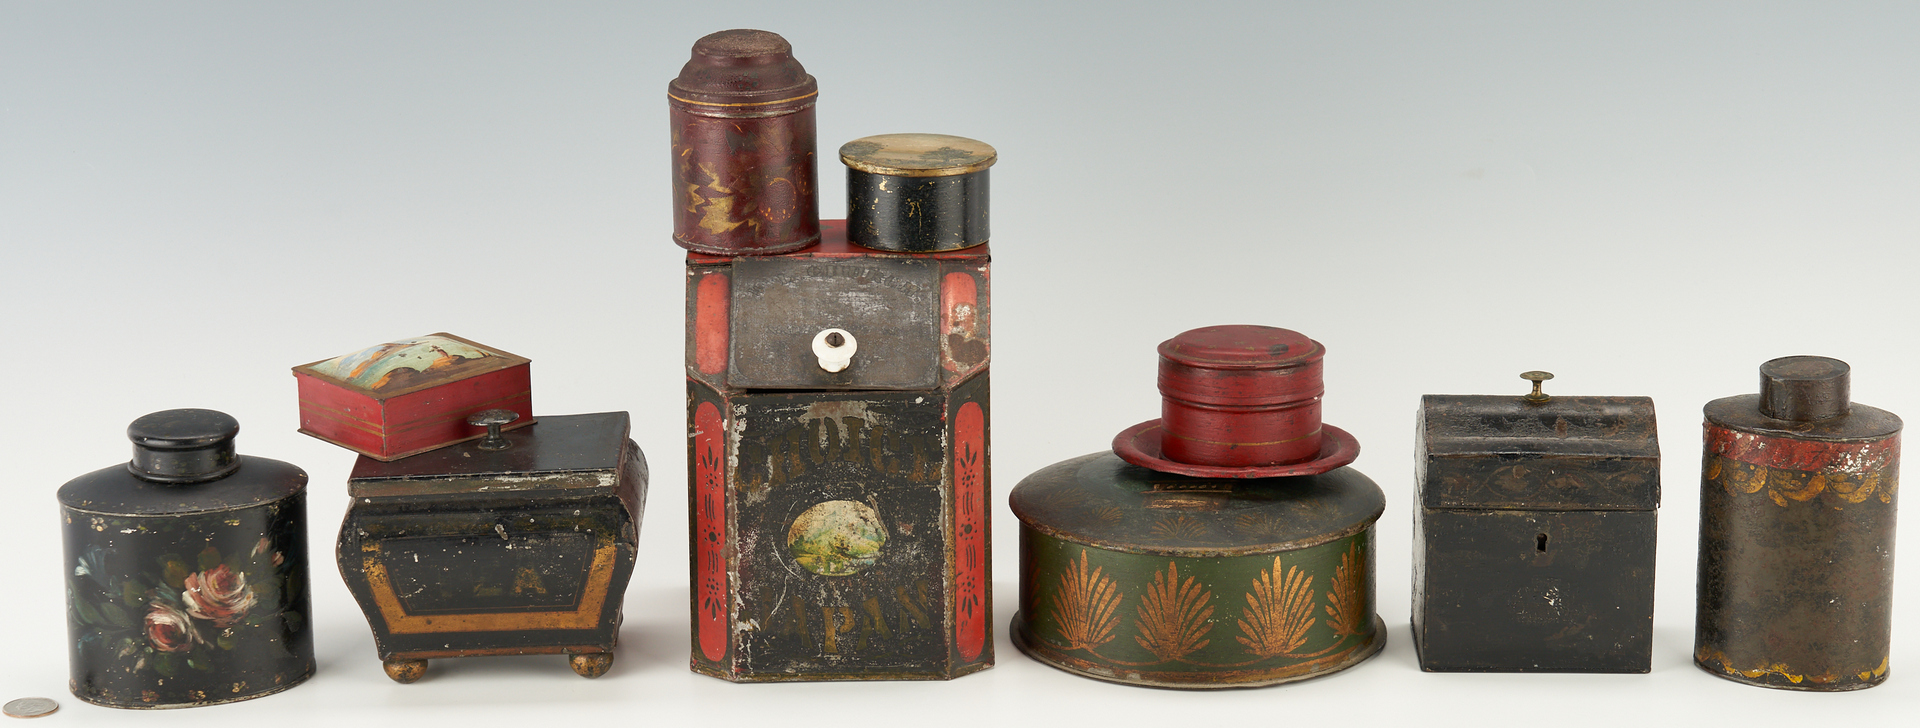 Lot 265: 11 Toleware Containers, incl. Tea Caddies